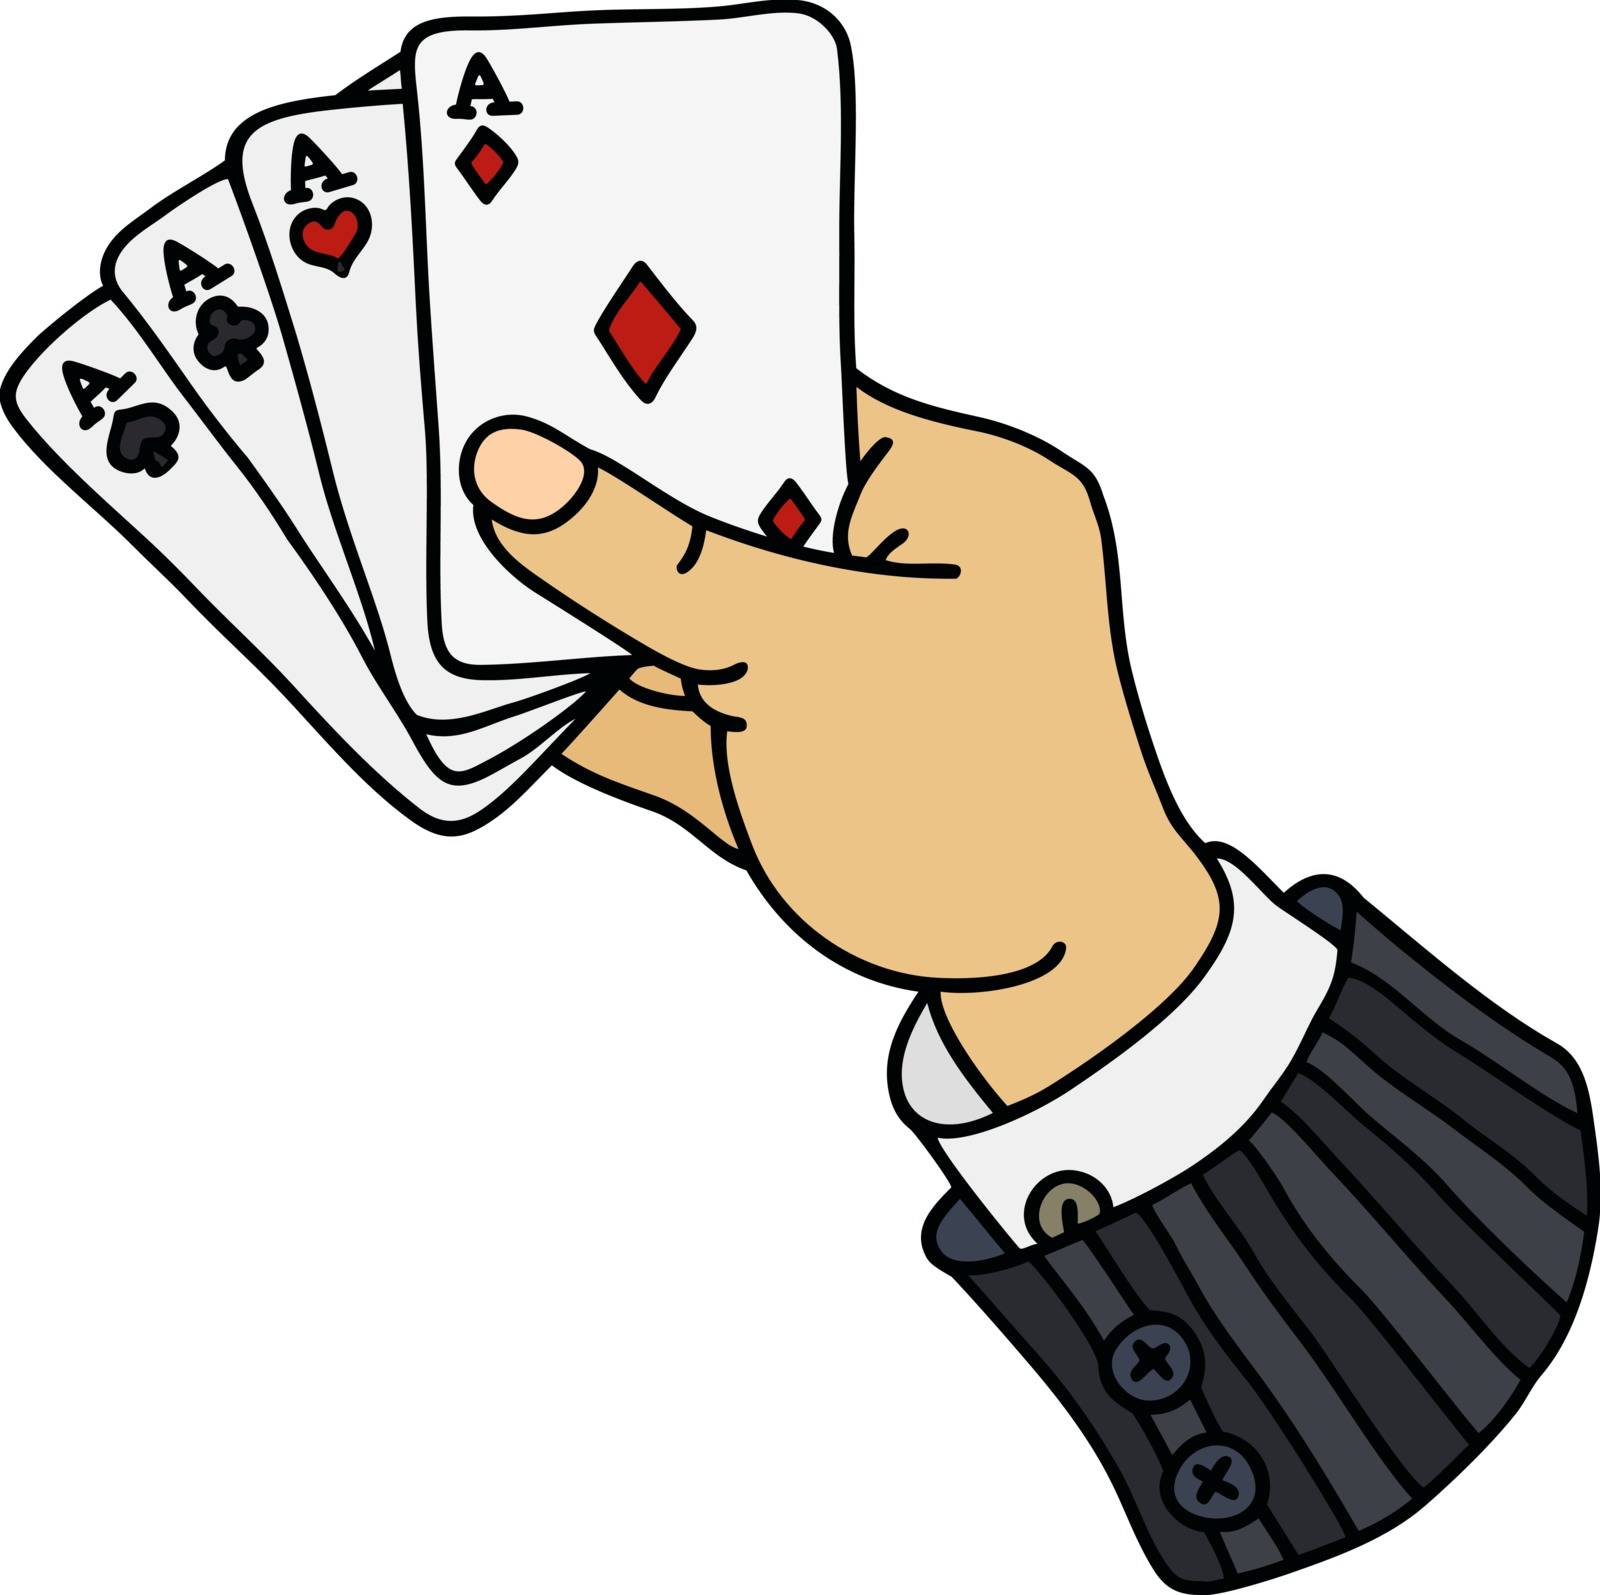 Funny hand drawing of four aces in hand